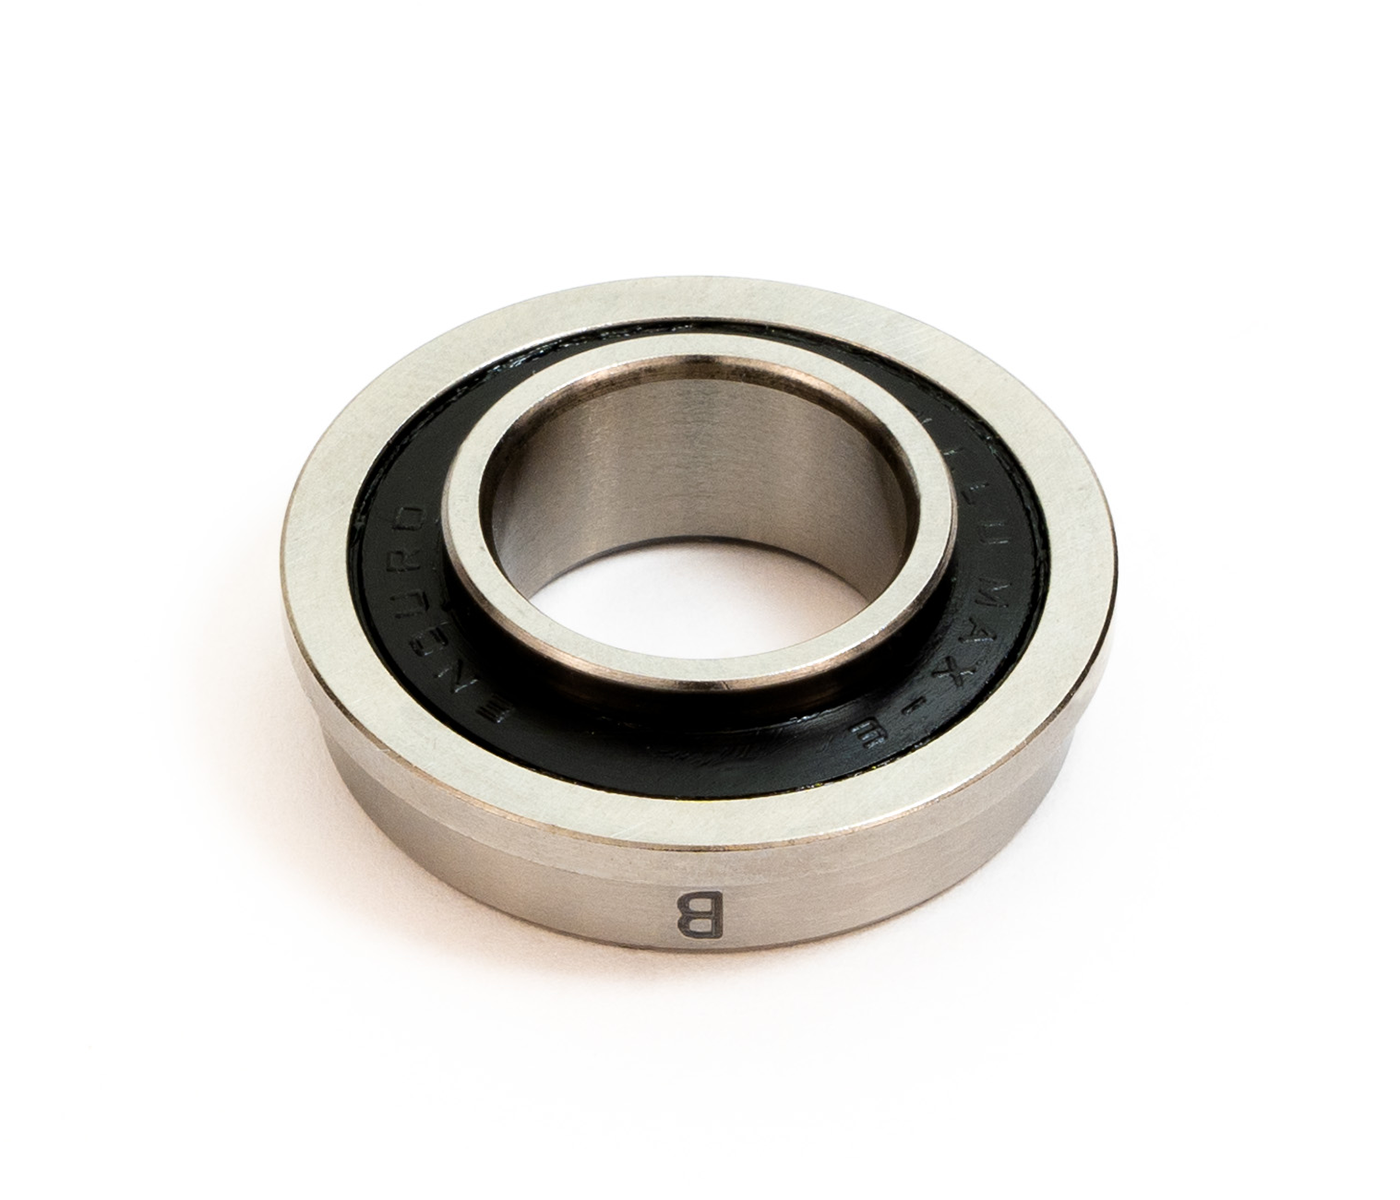 F6902 LLU MAX-EB - ABEC-3, Flanged, Extended Race, Radial Bearing (C3  Clearance) - 15mm x 28mm x 7/9.5mm